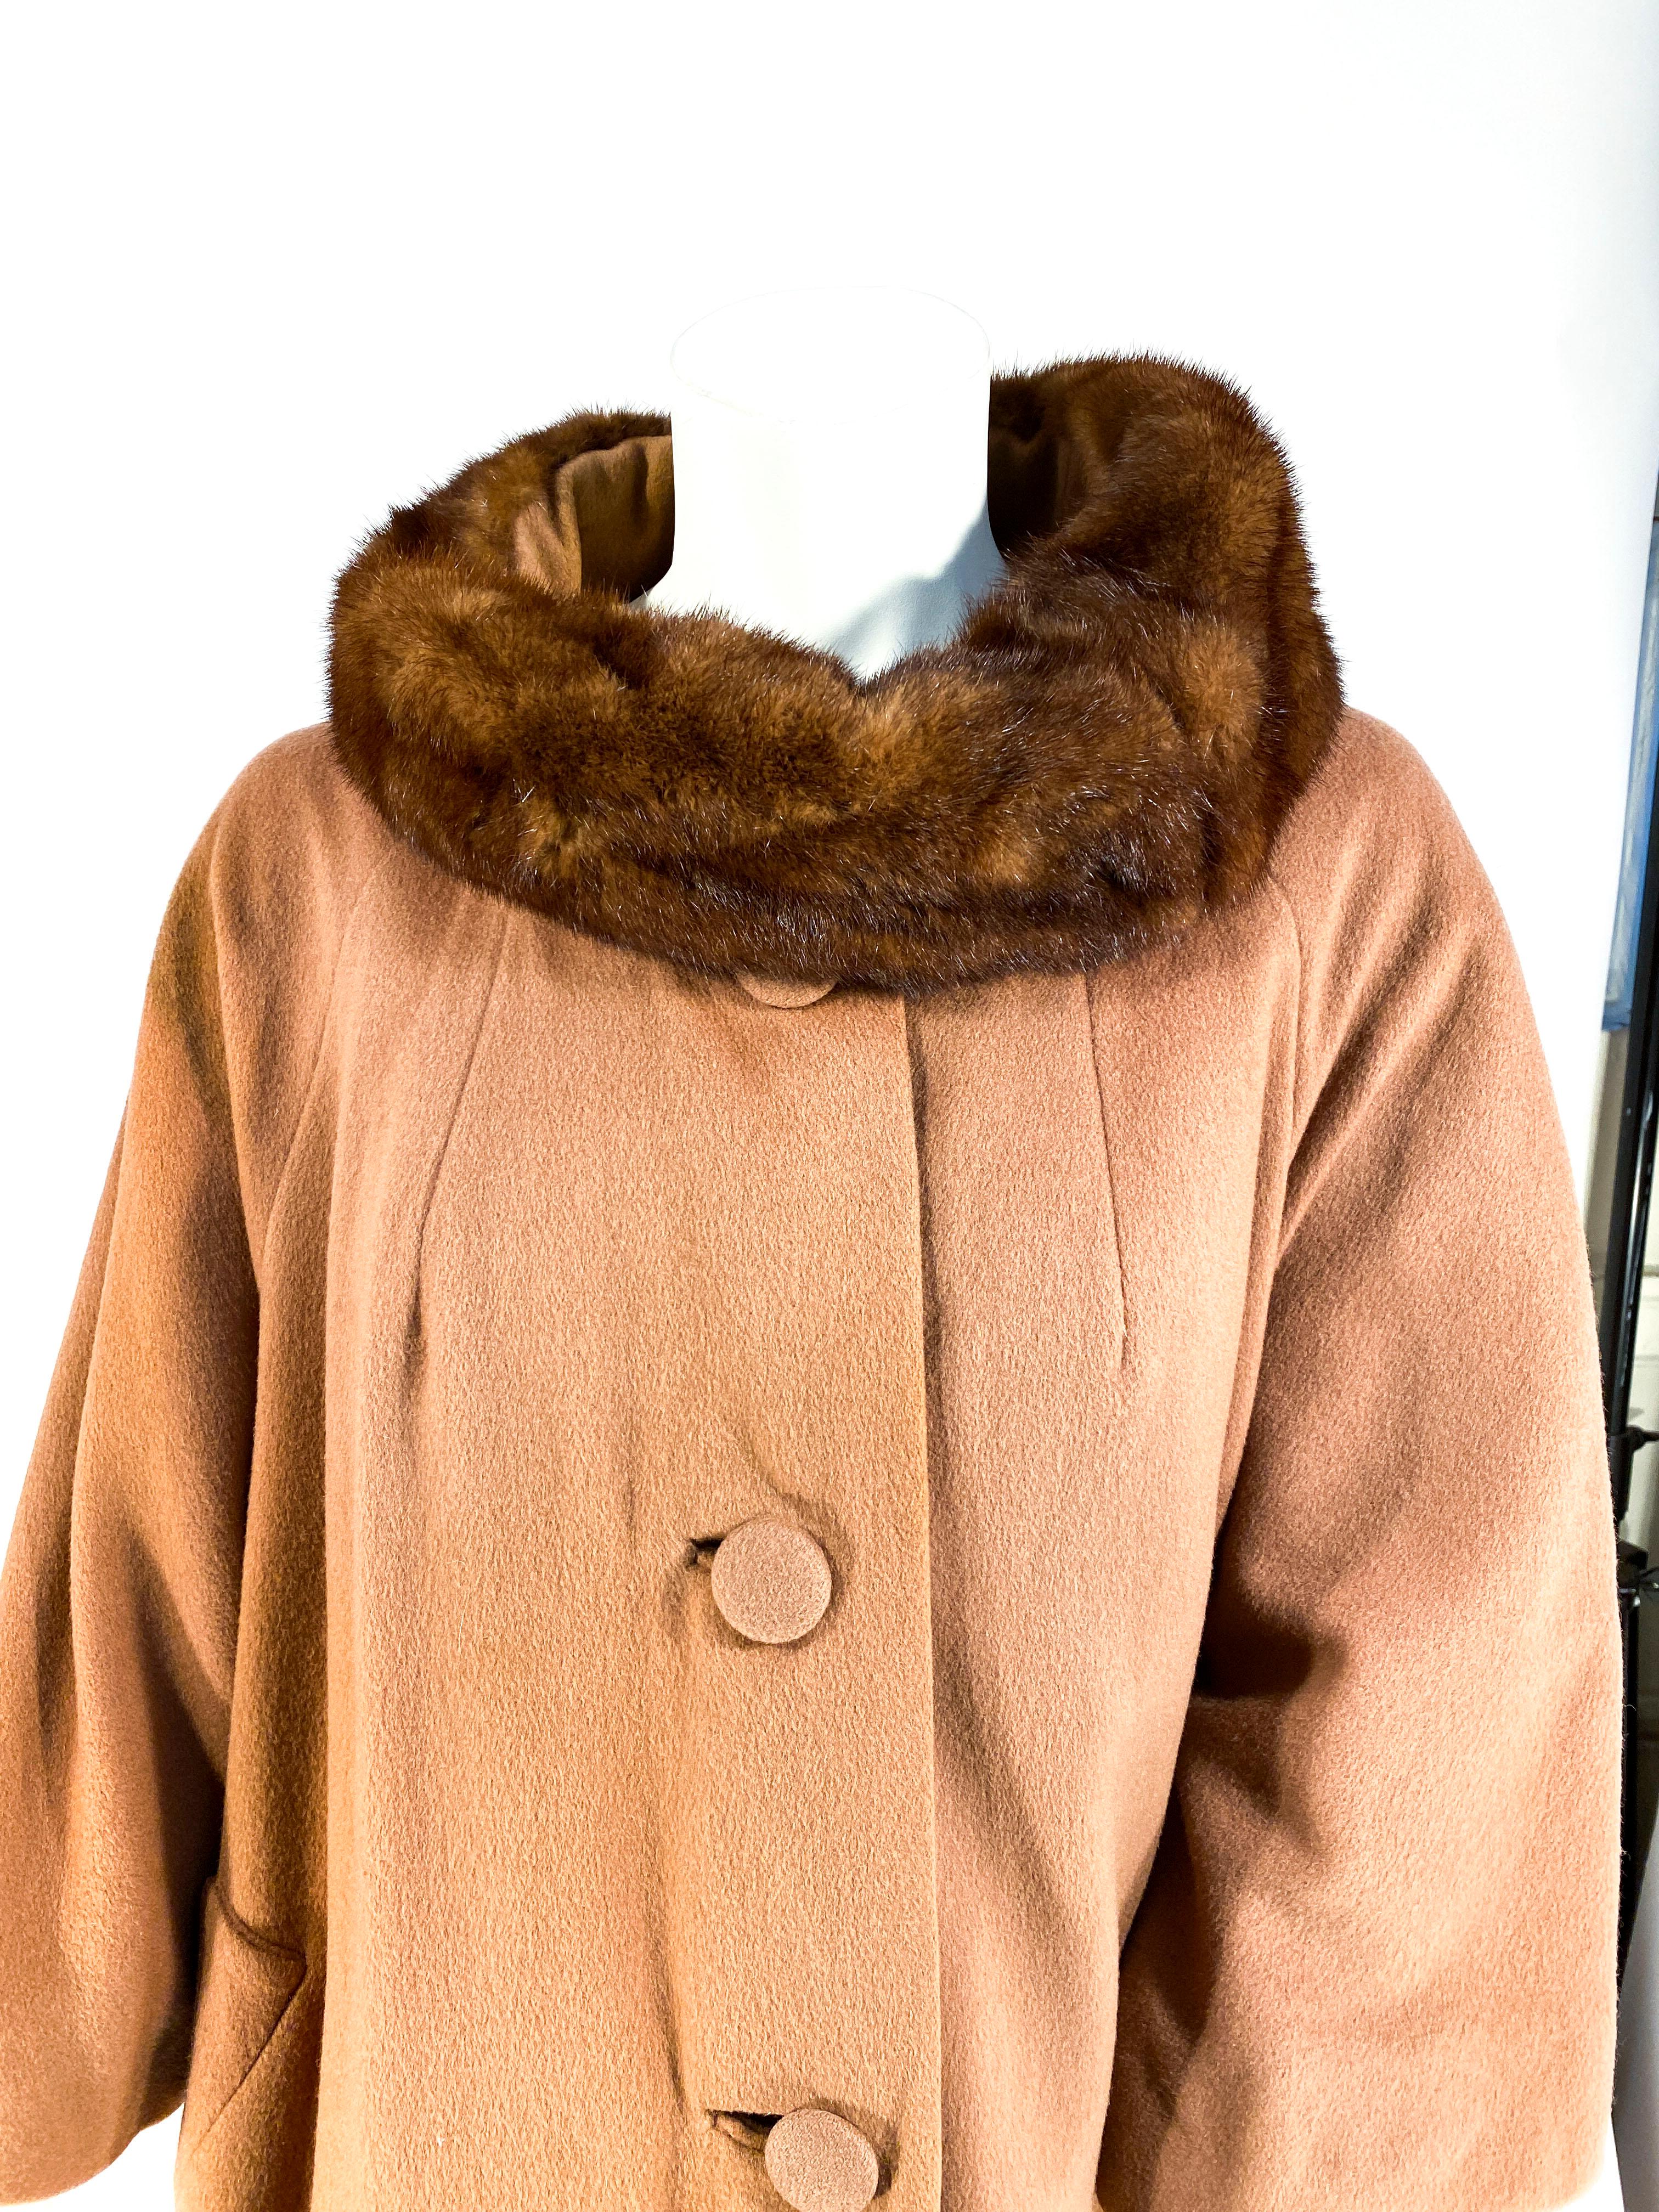 Late 1950s to early 1960s Lilli Ann mocha brown colored cashmere coat with an enlarged mink rolled collar and hand covered buttons. The body of the coat is very full but not quite a swing coat and the sleeves are glove length. The interior is fully